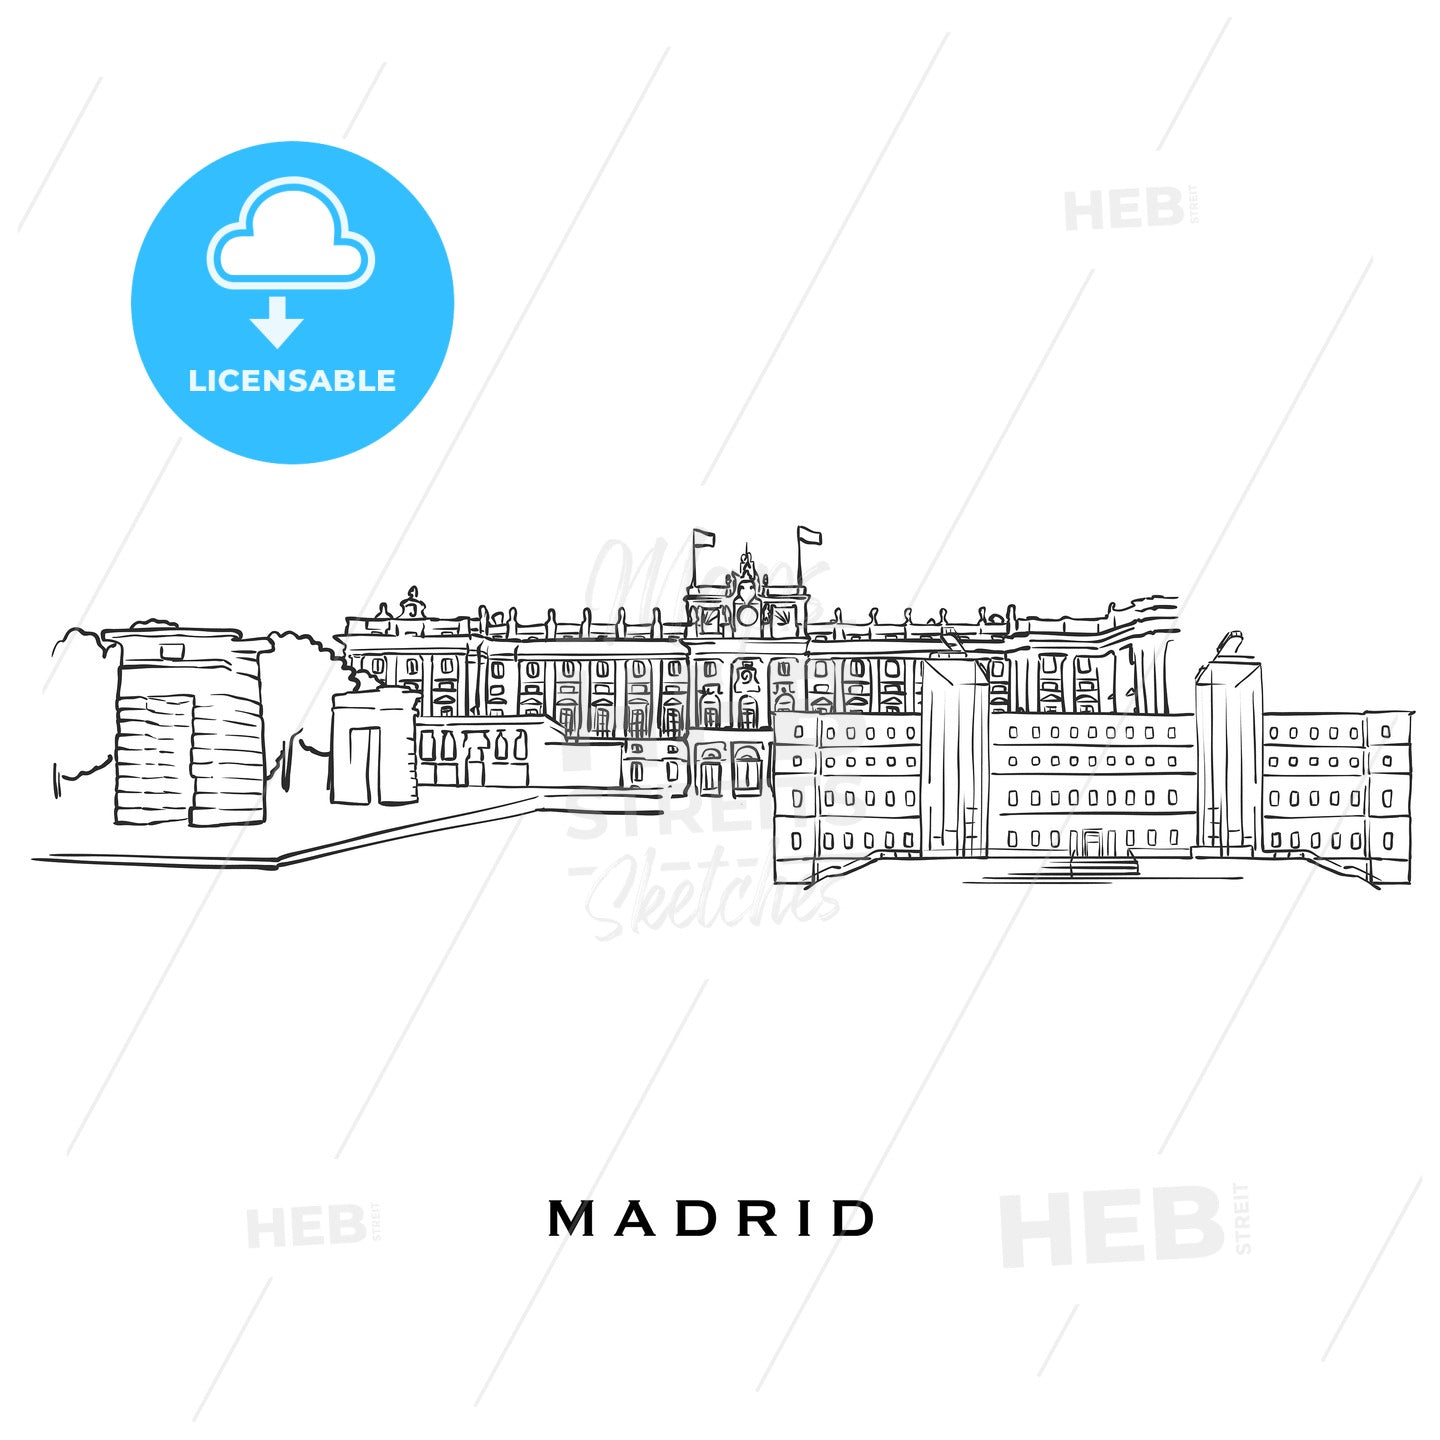 Madrid Spain famous architecture – instant download